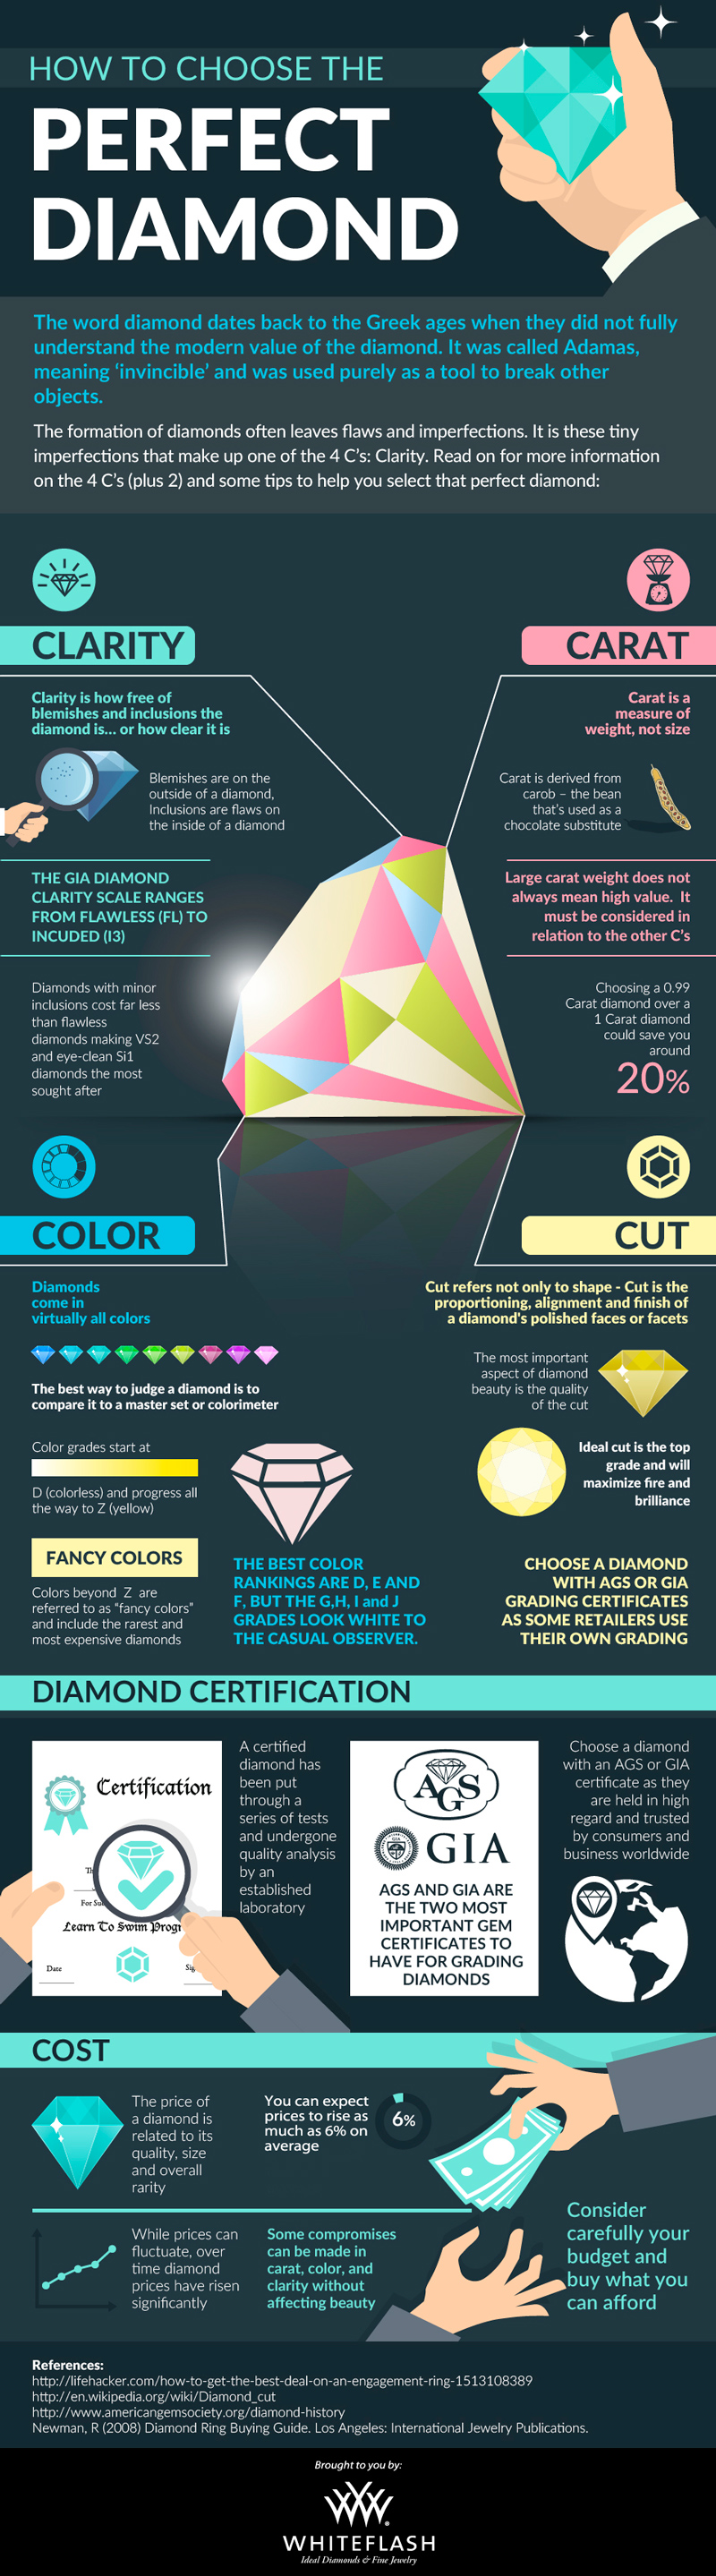 how-to-choose-the-perfect-diamond-infographic